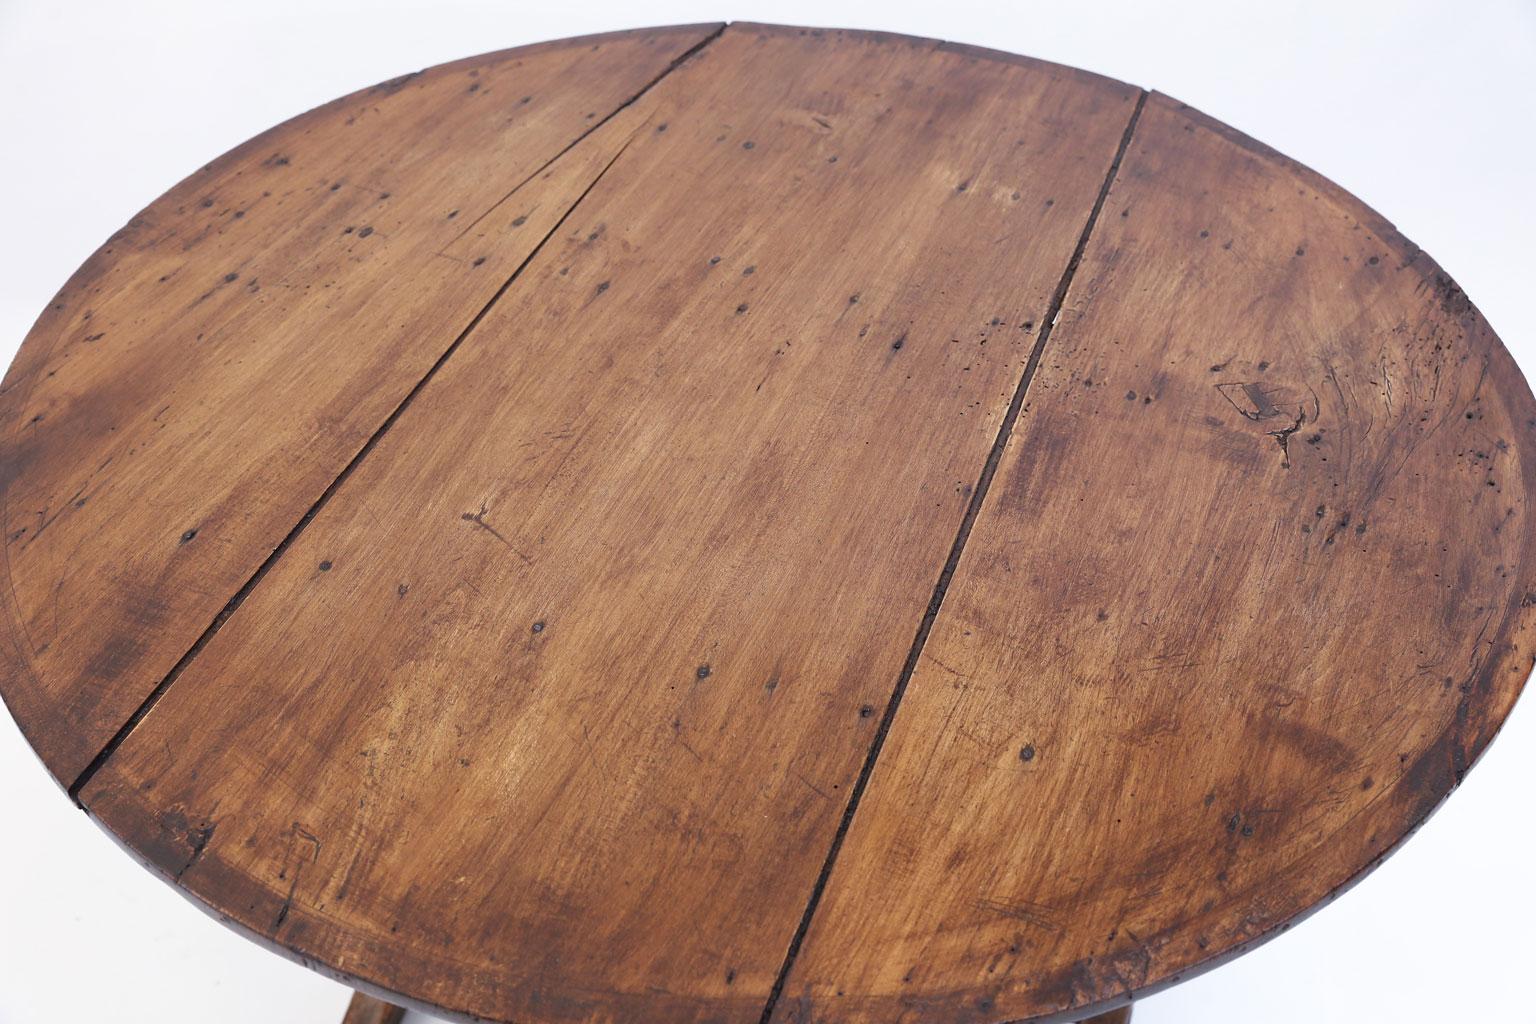 Rustic French vendange table (wine tasting table) in pine and oak. Simple, elegant design with functional tilt-top. The top originally covered and decorated with the name and logo for the vineyard in which it was used. Today this table can serve as